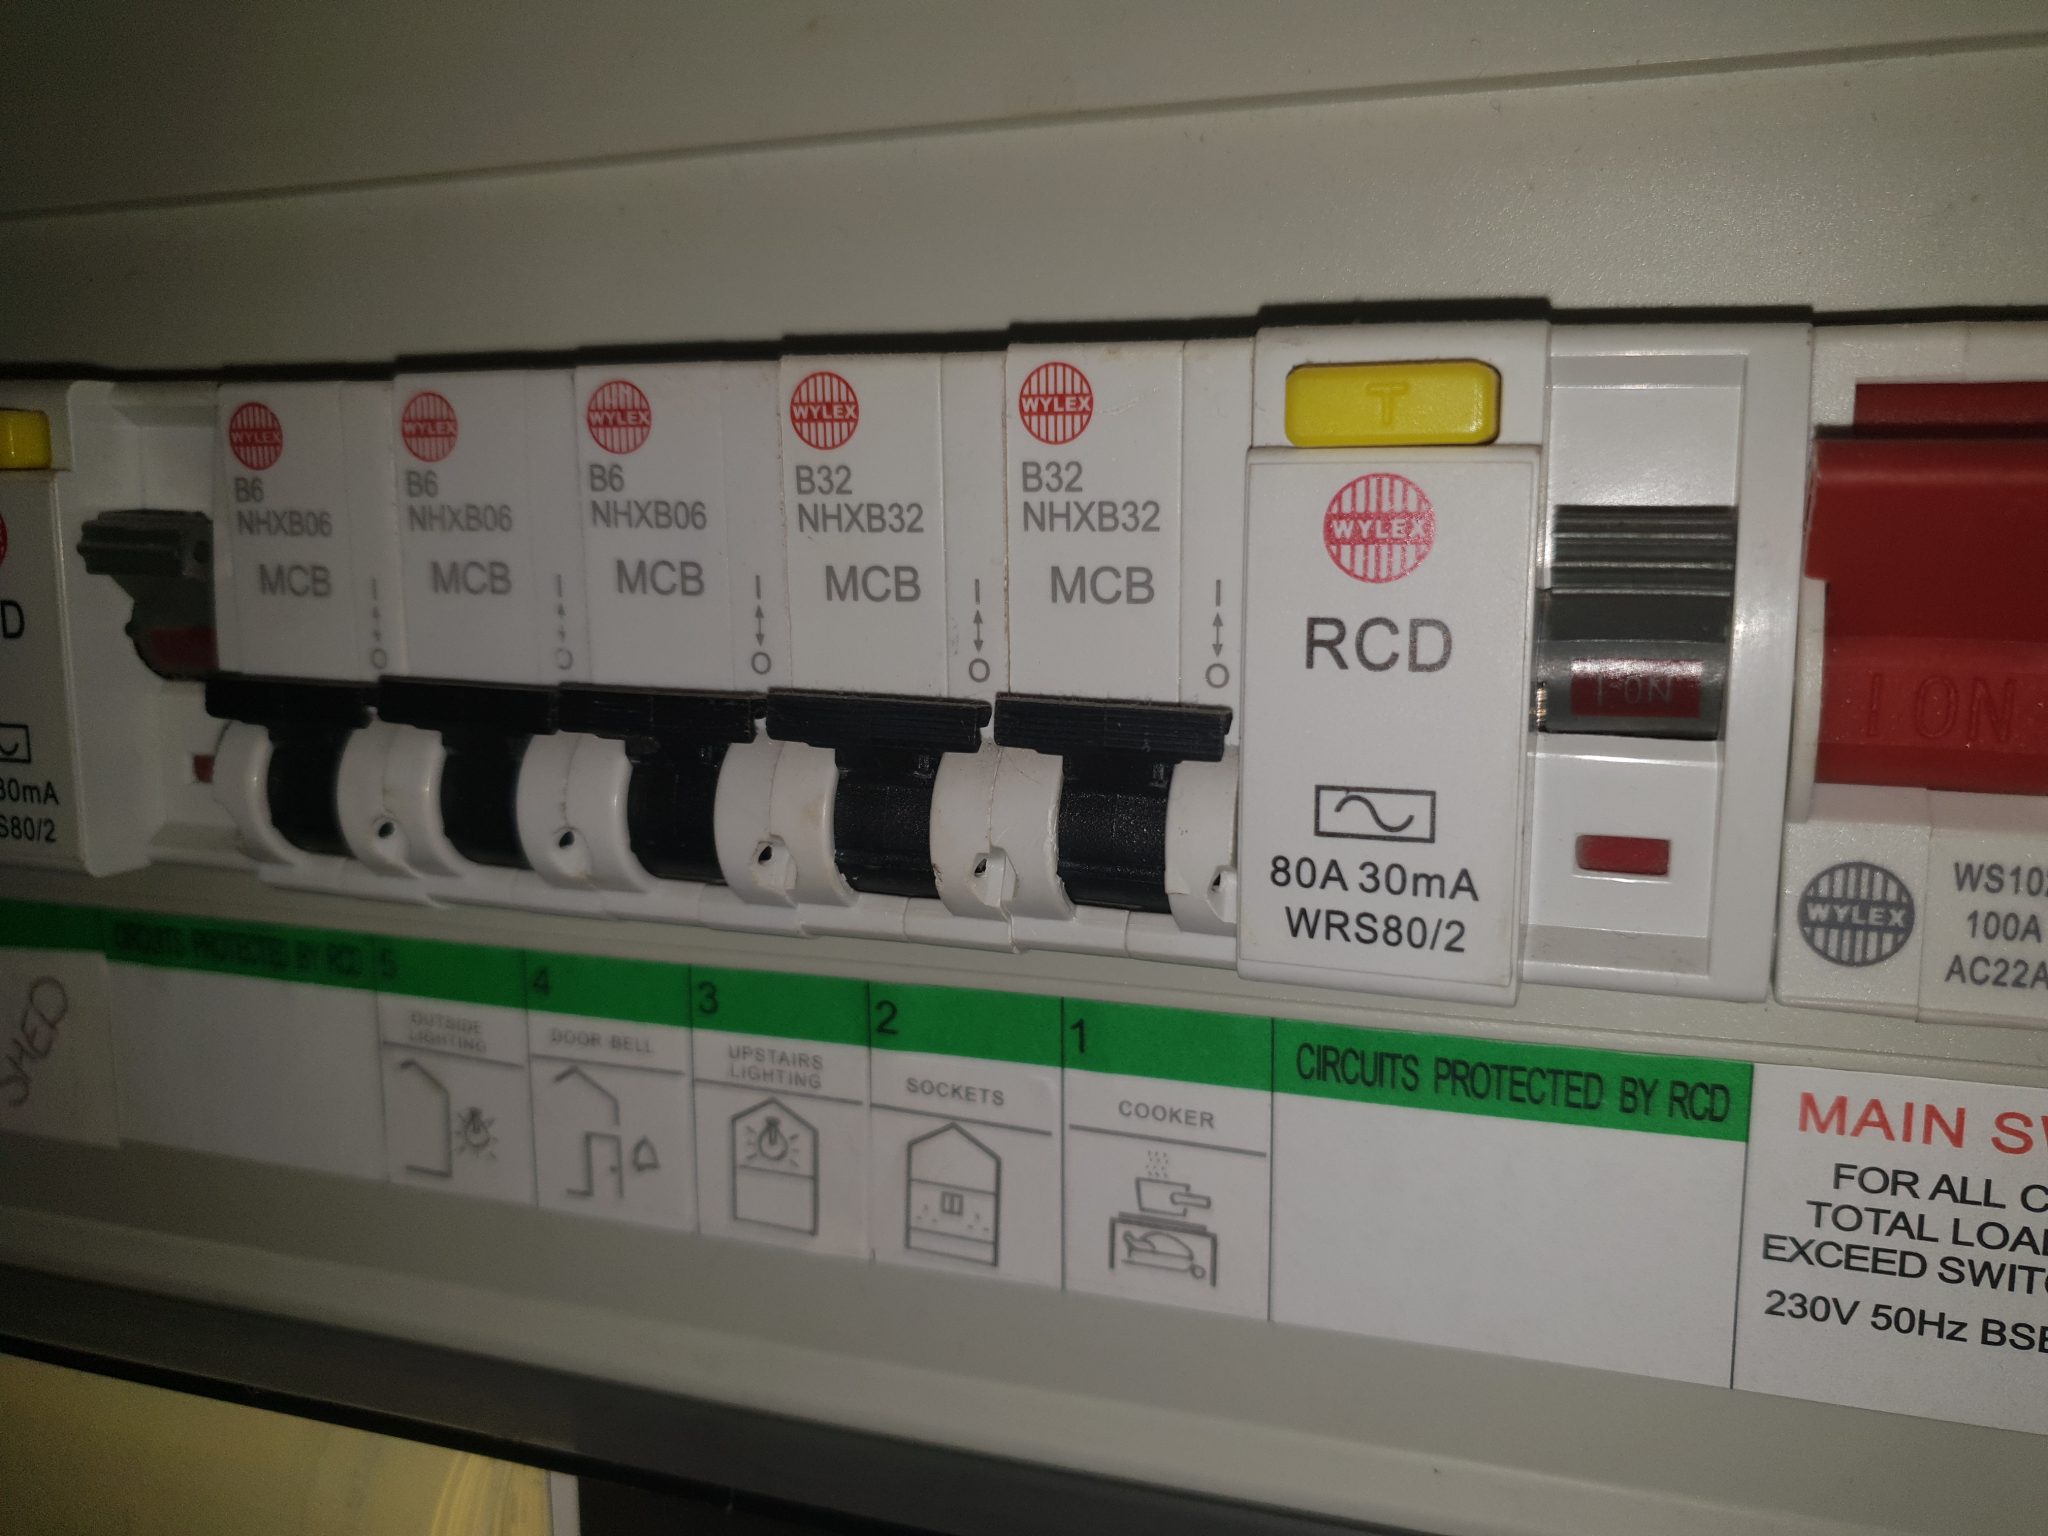 What EICR Code For No RCD?